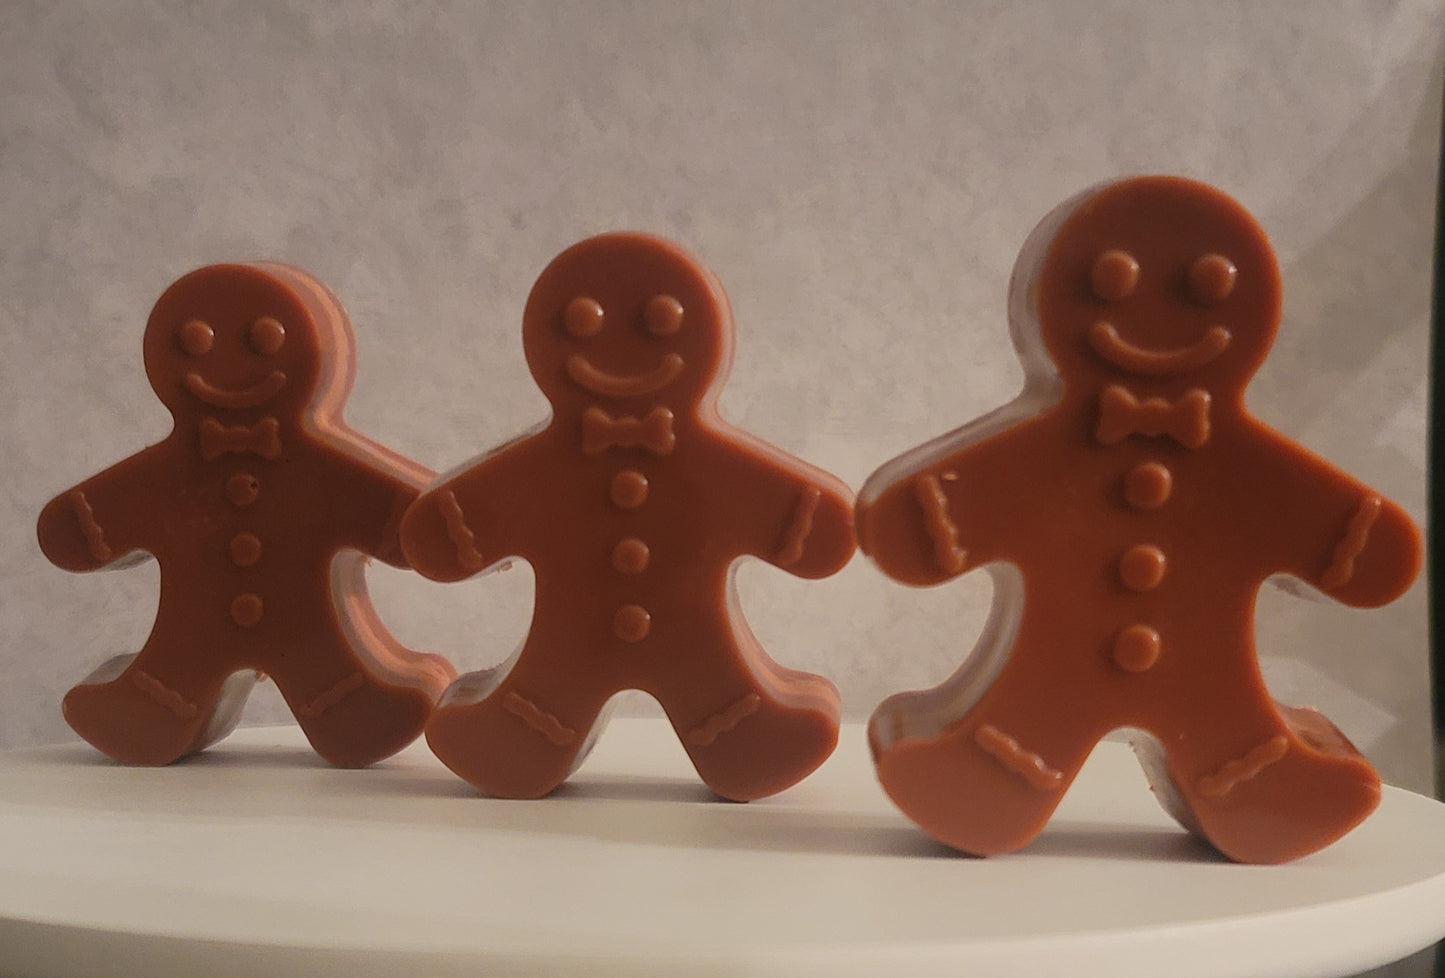 I'm the gingerbread man